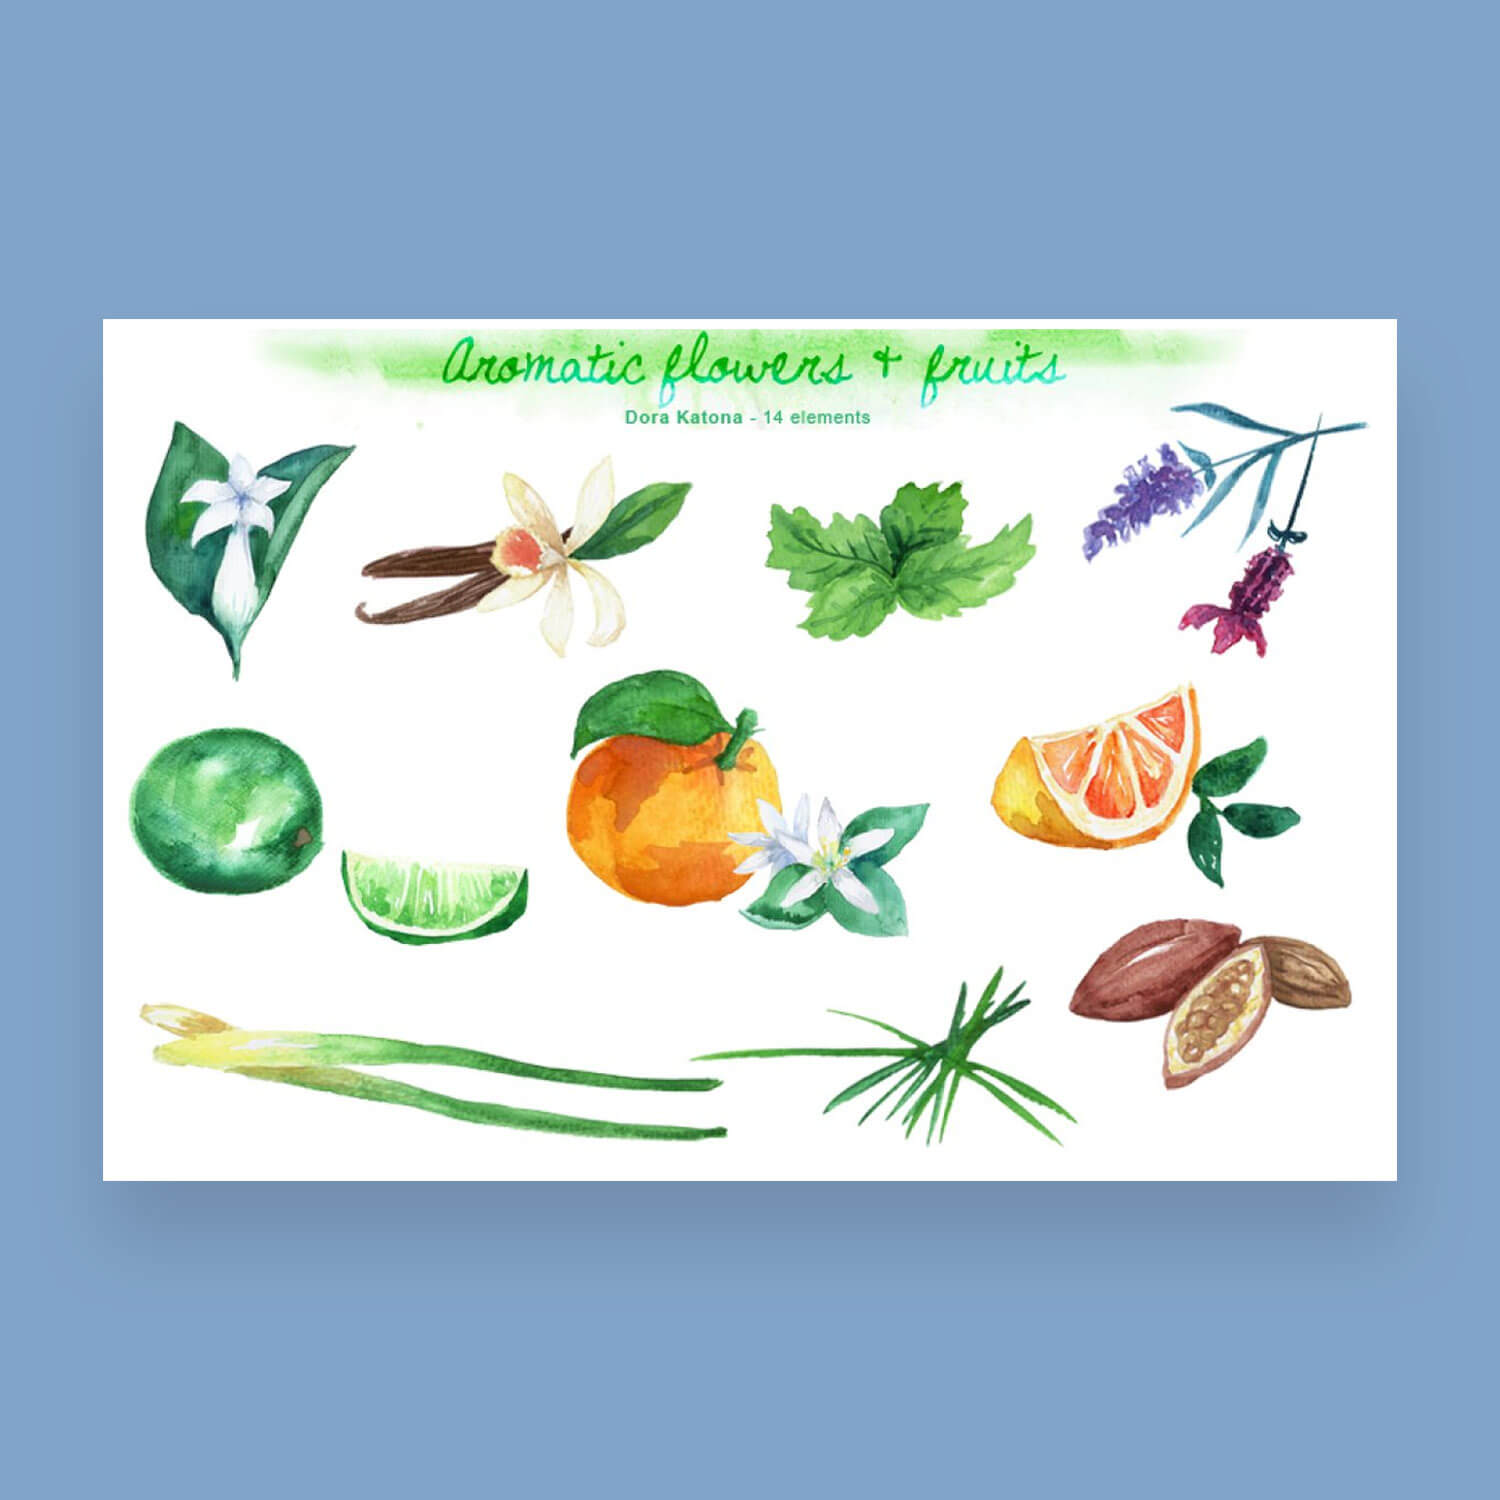 Aromatic plants and fruits set.